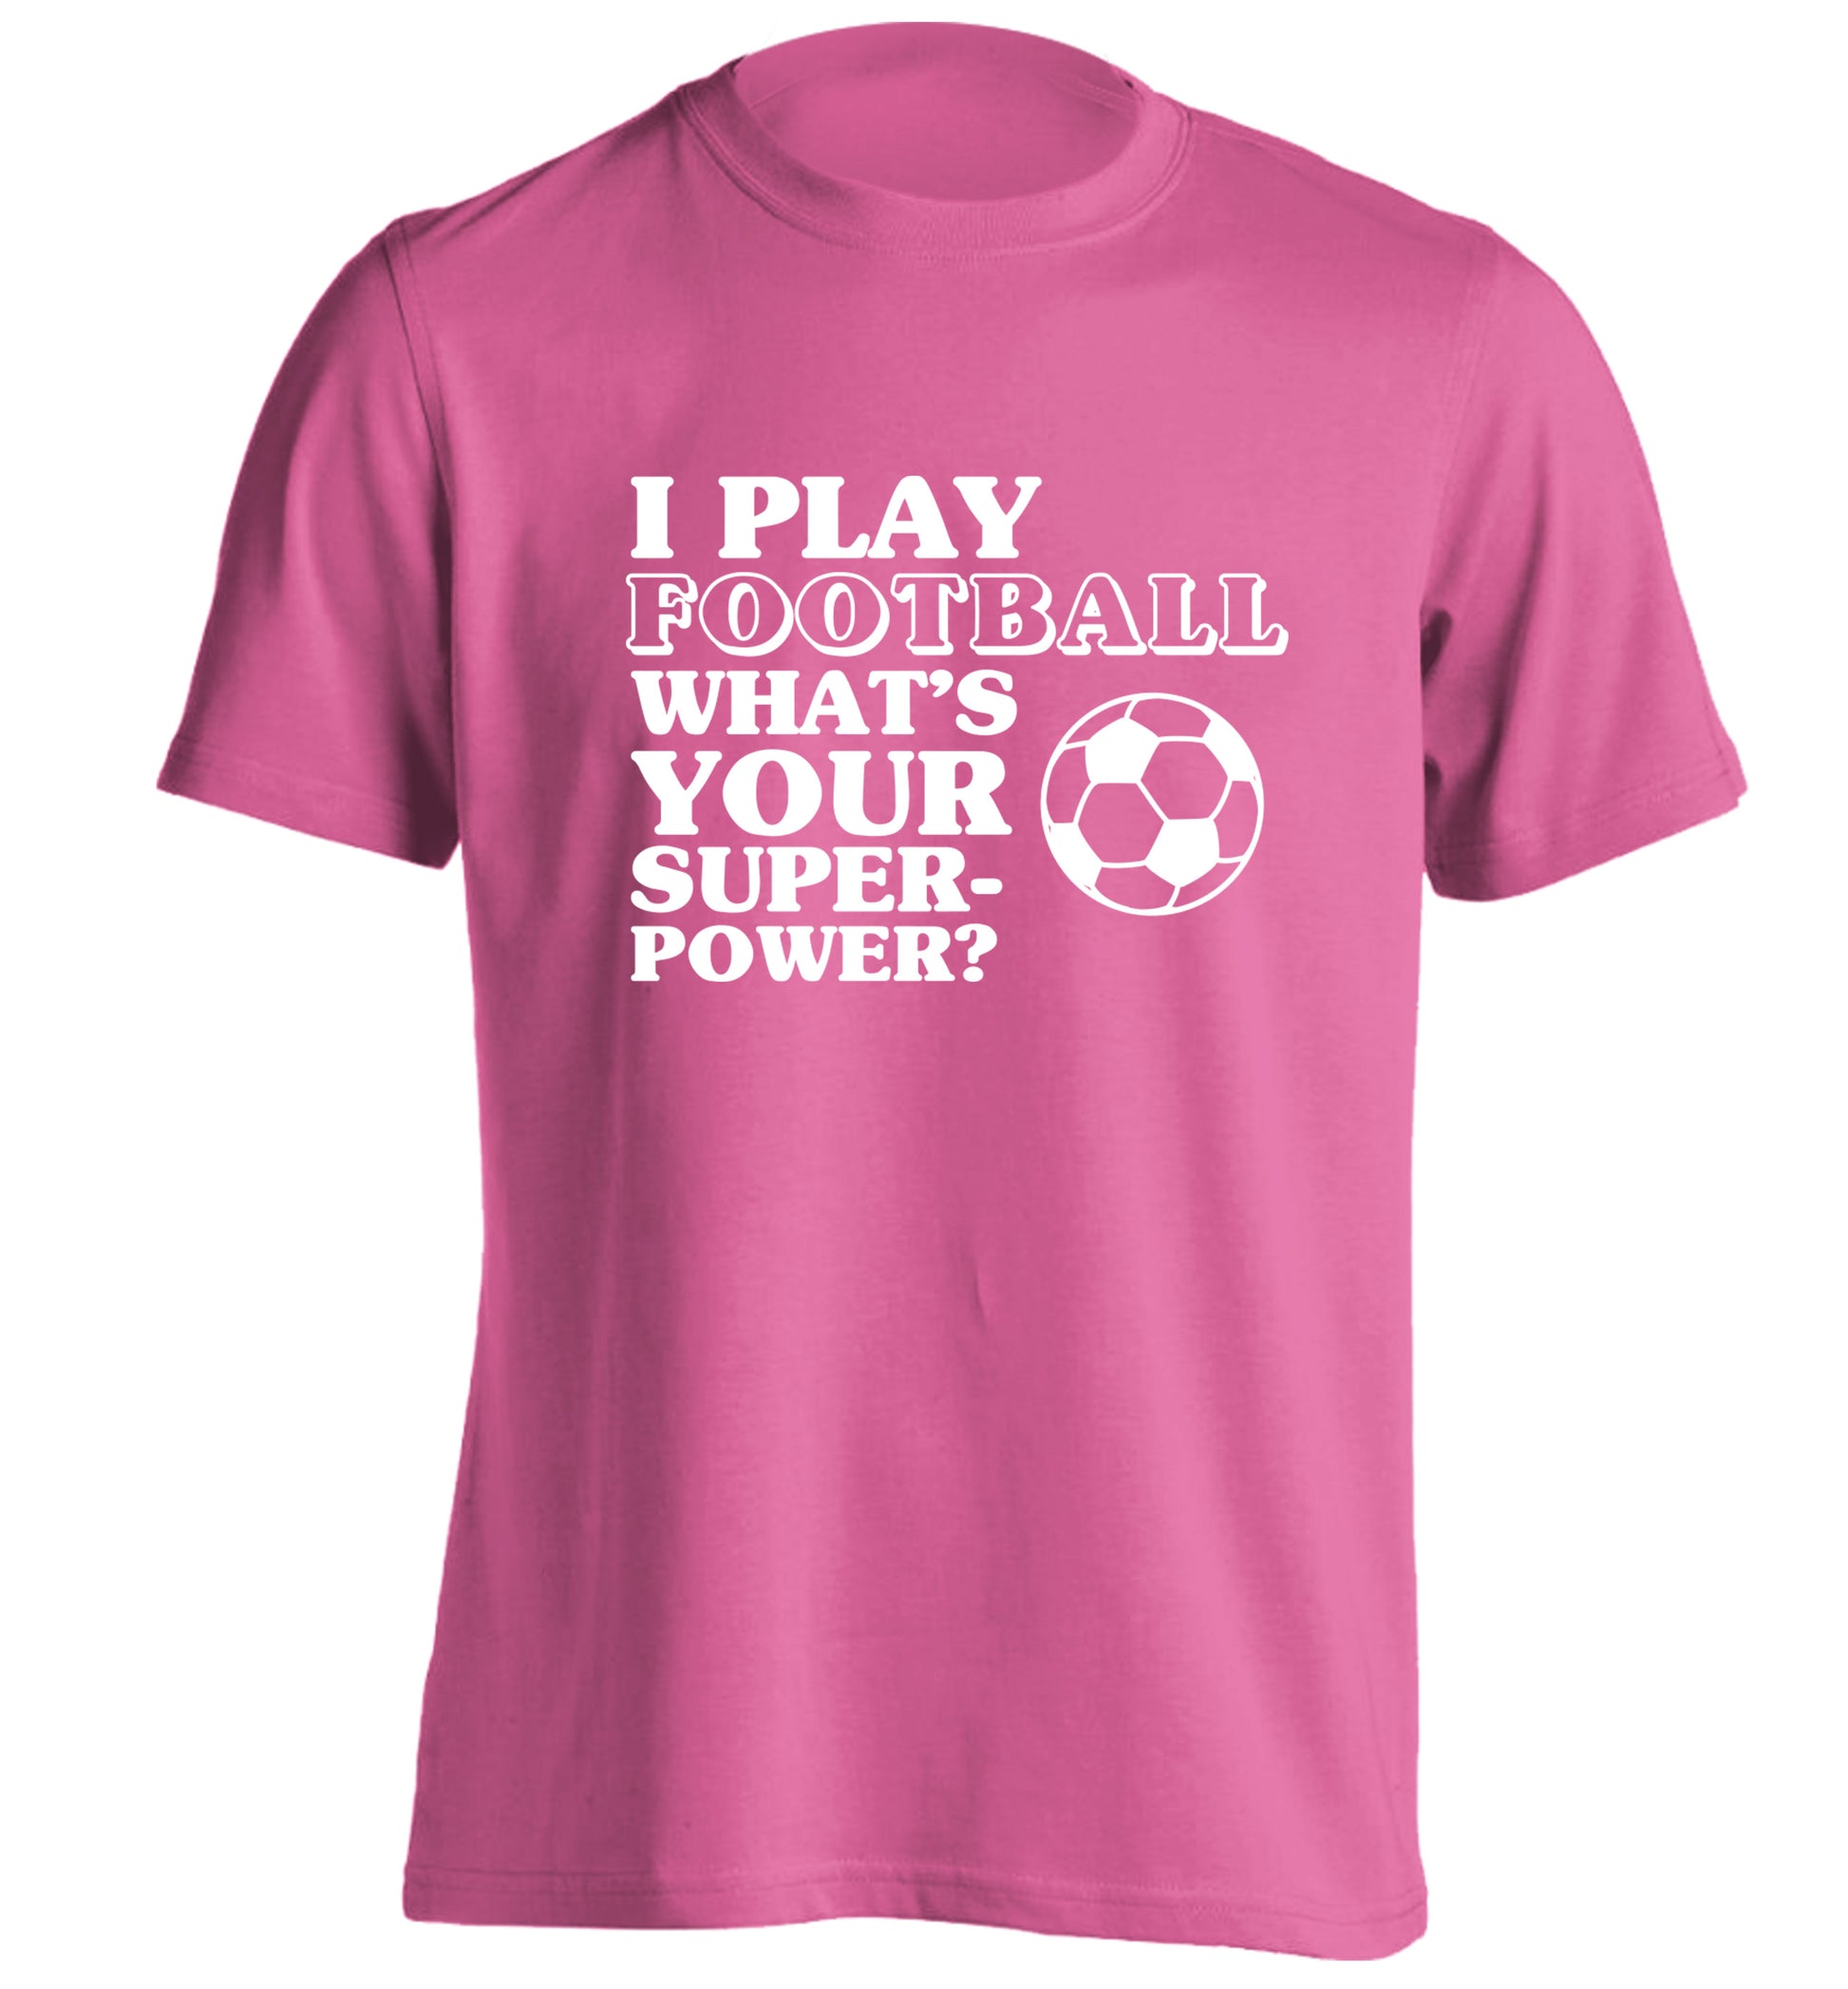 I play football what's your superpower? adults unisexpink Tshirt 2XL